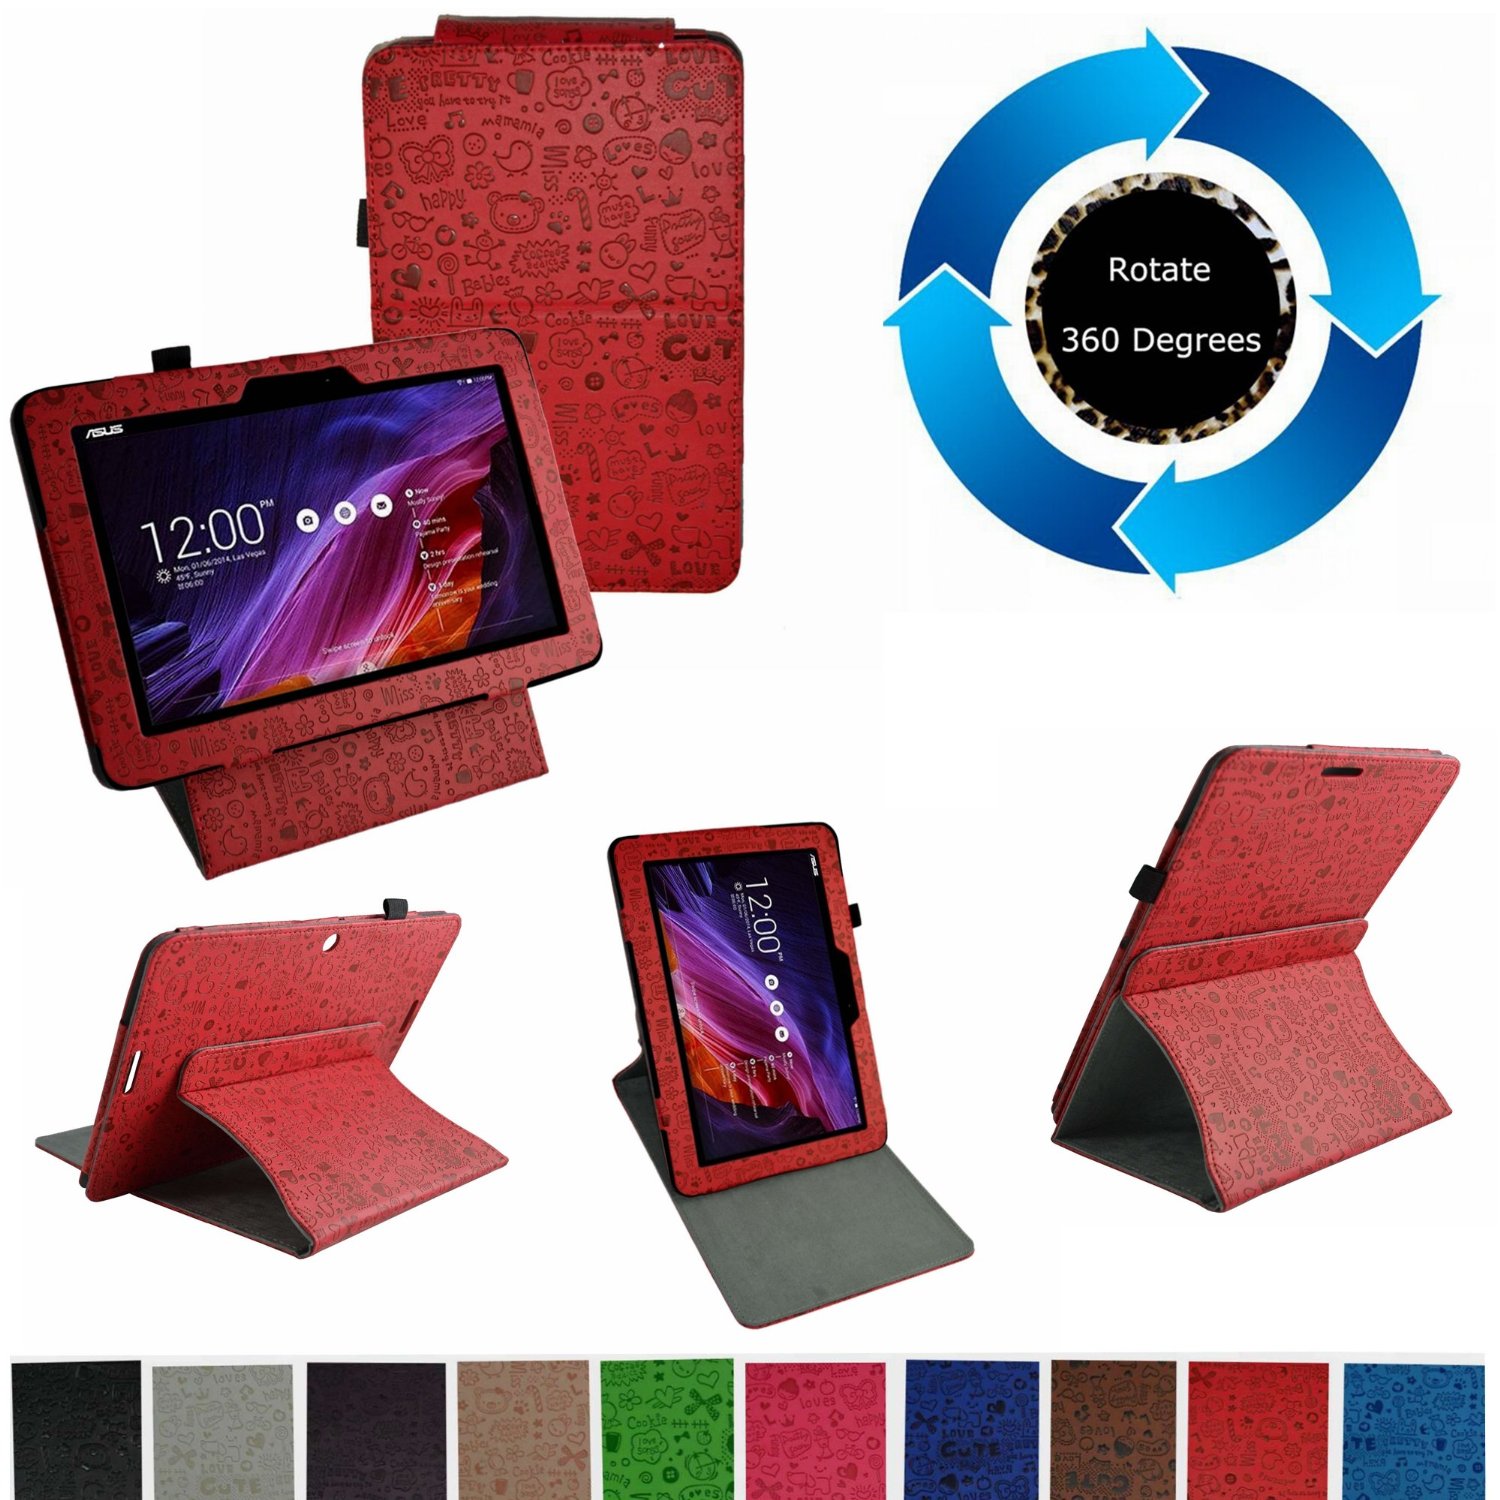 Case for 10.1" ASUS Transformer Pad TF103C Android Tablet Red